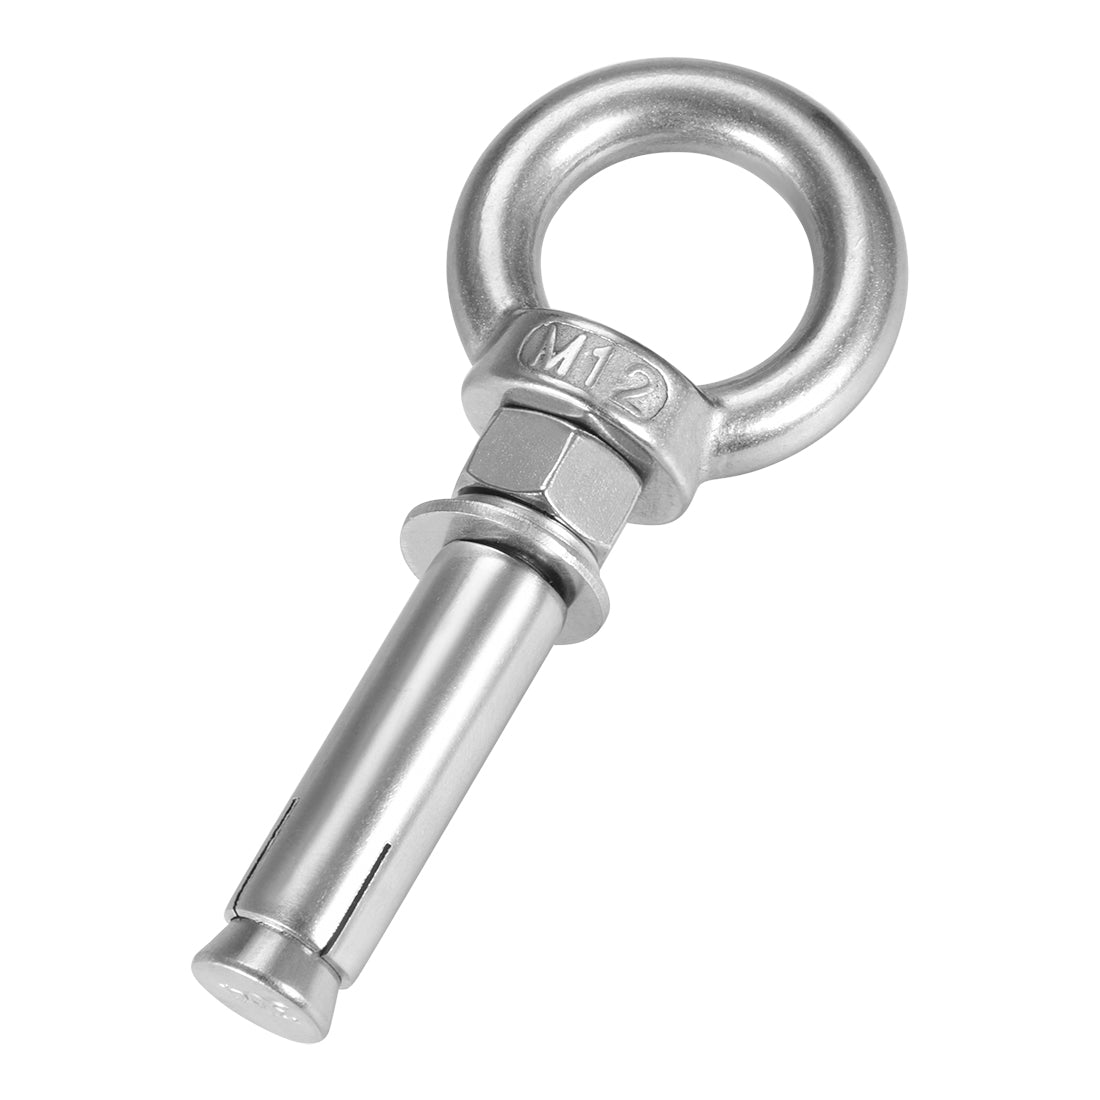 uxcell Uxcell M12 x 80 Expansion Eyebolt Eye Nut Screw with Ring Anchor Raw Bolts 1 Pcs